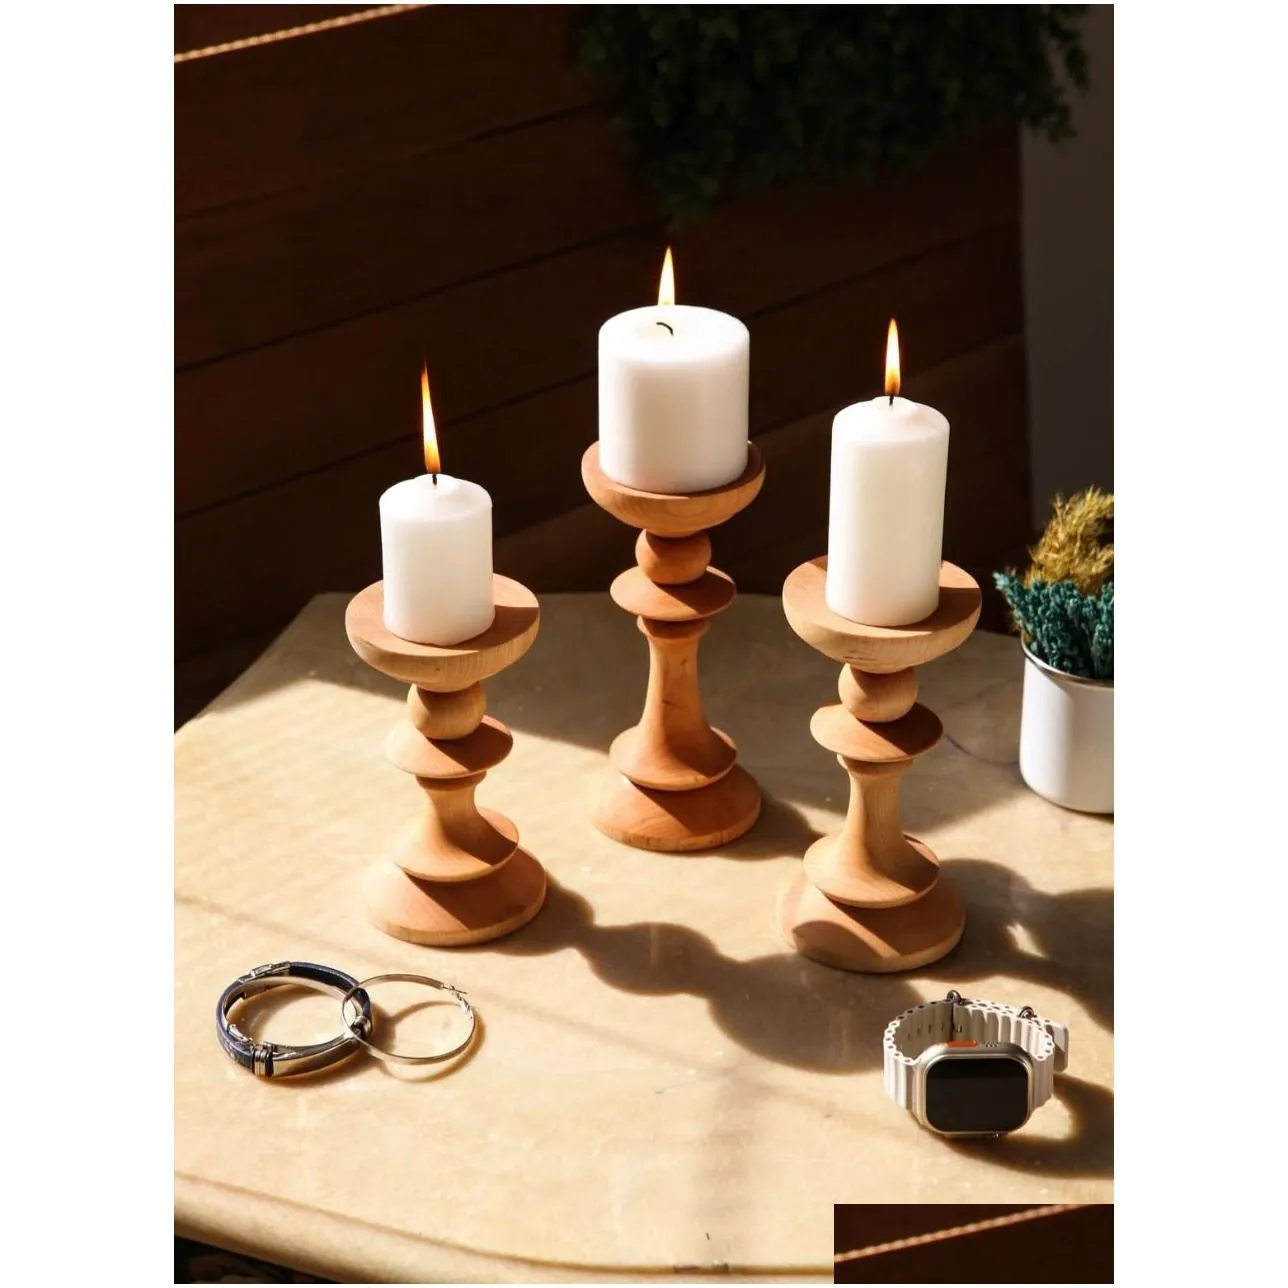 Candle Holders Handmade Candle Holders - Home Decor Gift Wooden Candlestick Wedding New Gifts Wood Drop Delivery Home Garden Home Deco Otcrt